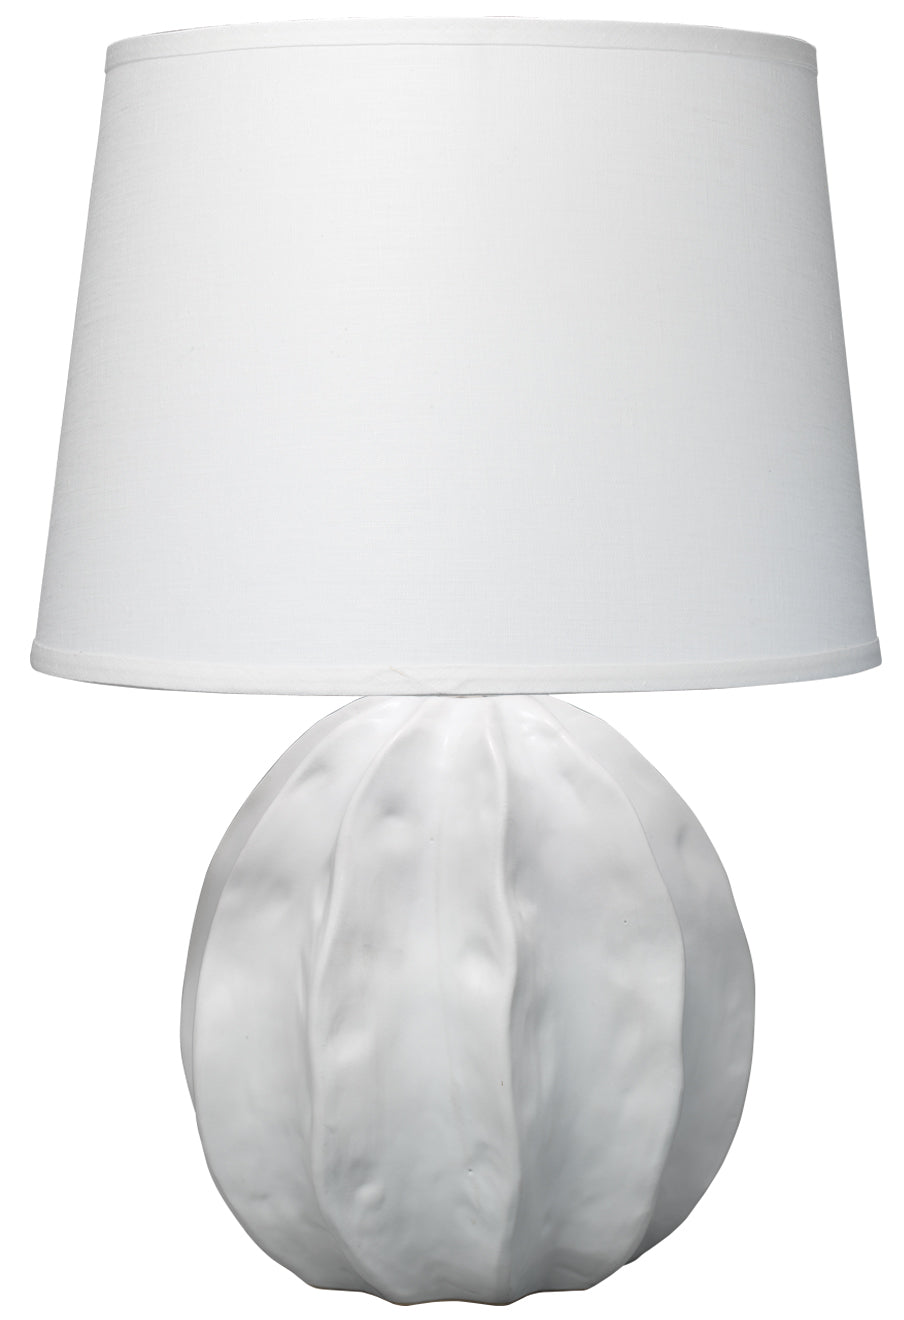 Urchin Table Lamp in Matte White with Large Cone Shade in White Linen